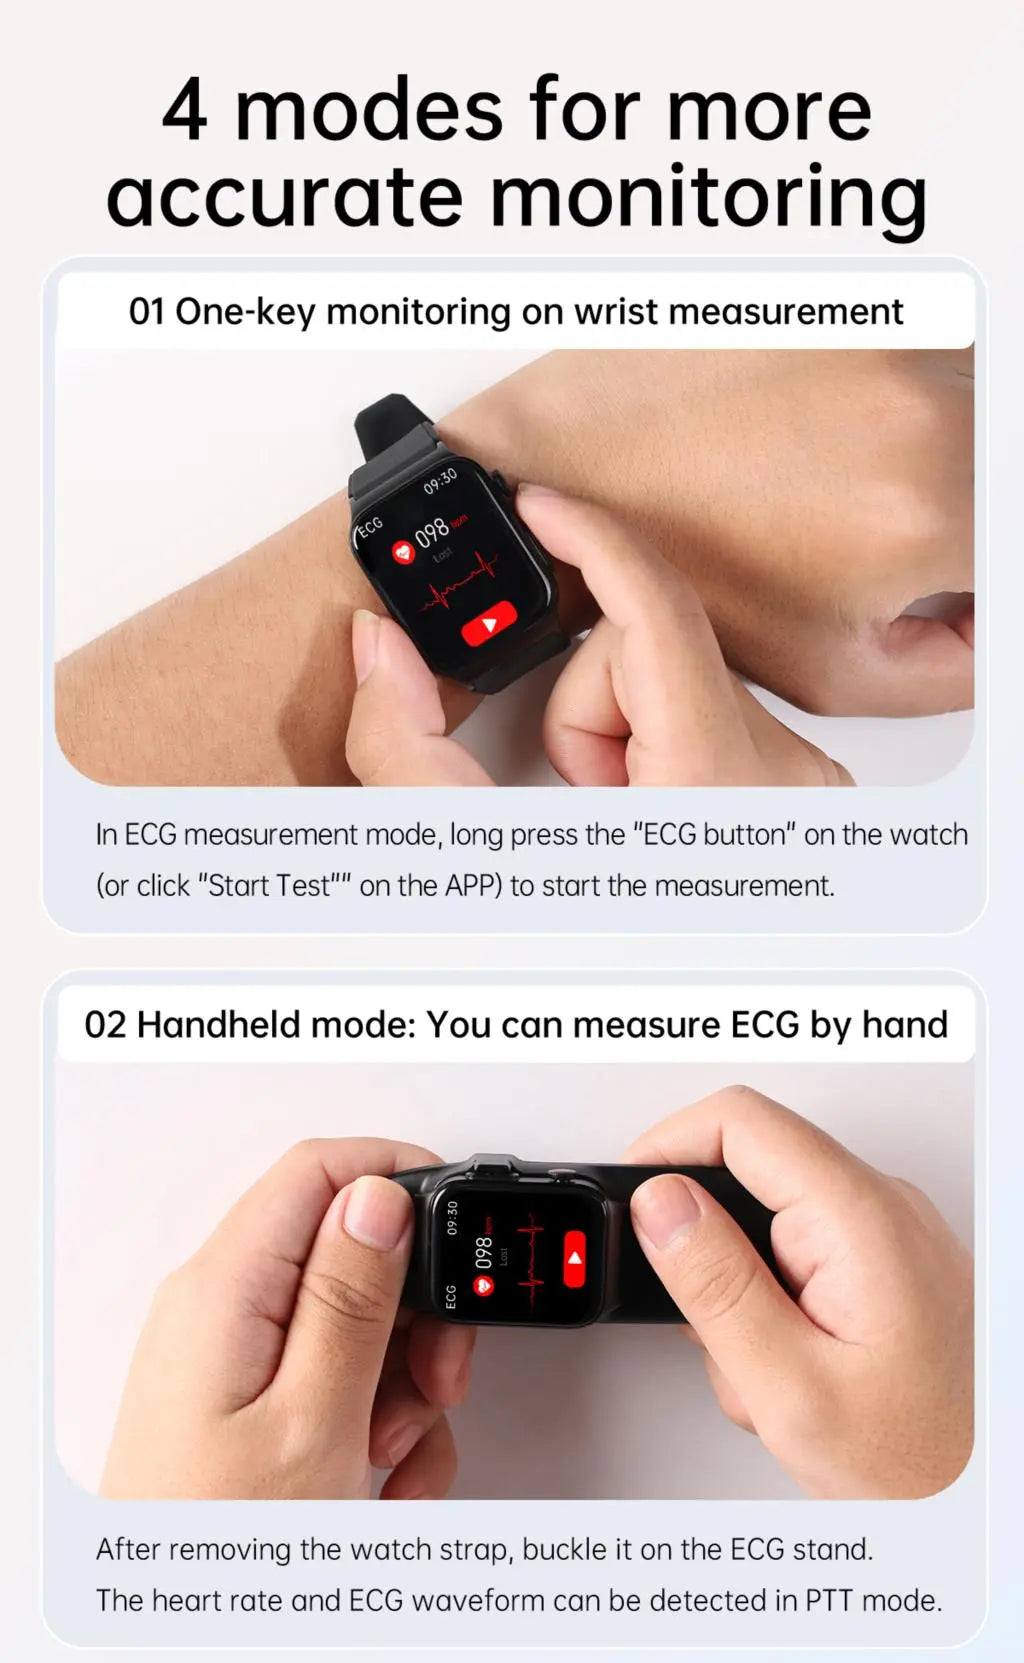 QUANTYVO™ Protector - Pain Free Blood Sugar Monitoring & ECG Chest Strap